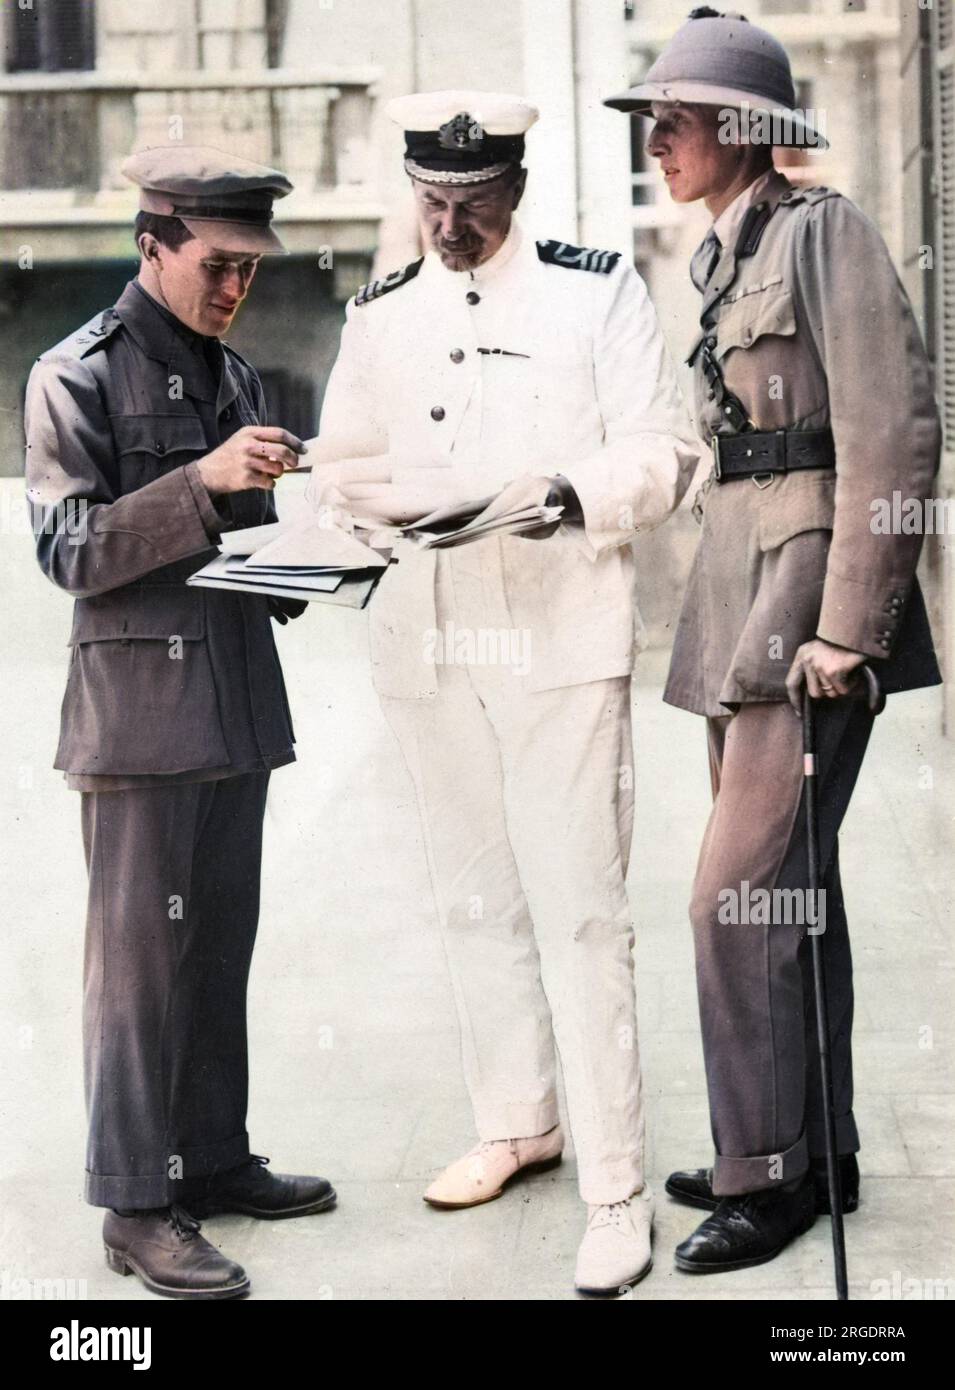 Lieutenant Colonel Thomas Edward Lawrence (aka Lawrence of Arabia, 1888-1935), British Army officer best known for his liaison role during the Arab Revolt against Ottoman Turkish rule of 1916-1918.  Seen here with Lieutenant Colonel Alan Dawnay and Commander David George Hogarth (Geographical Section of the Naval Intelligence Division), standing outside the Foreign OfficeÆs Arab Bureau in Cairo, Egypt. Stock Photo